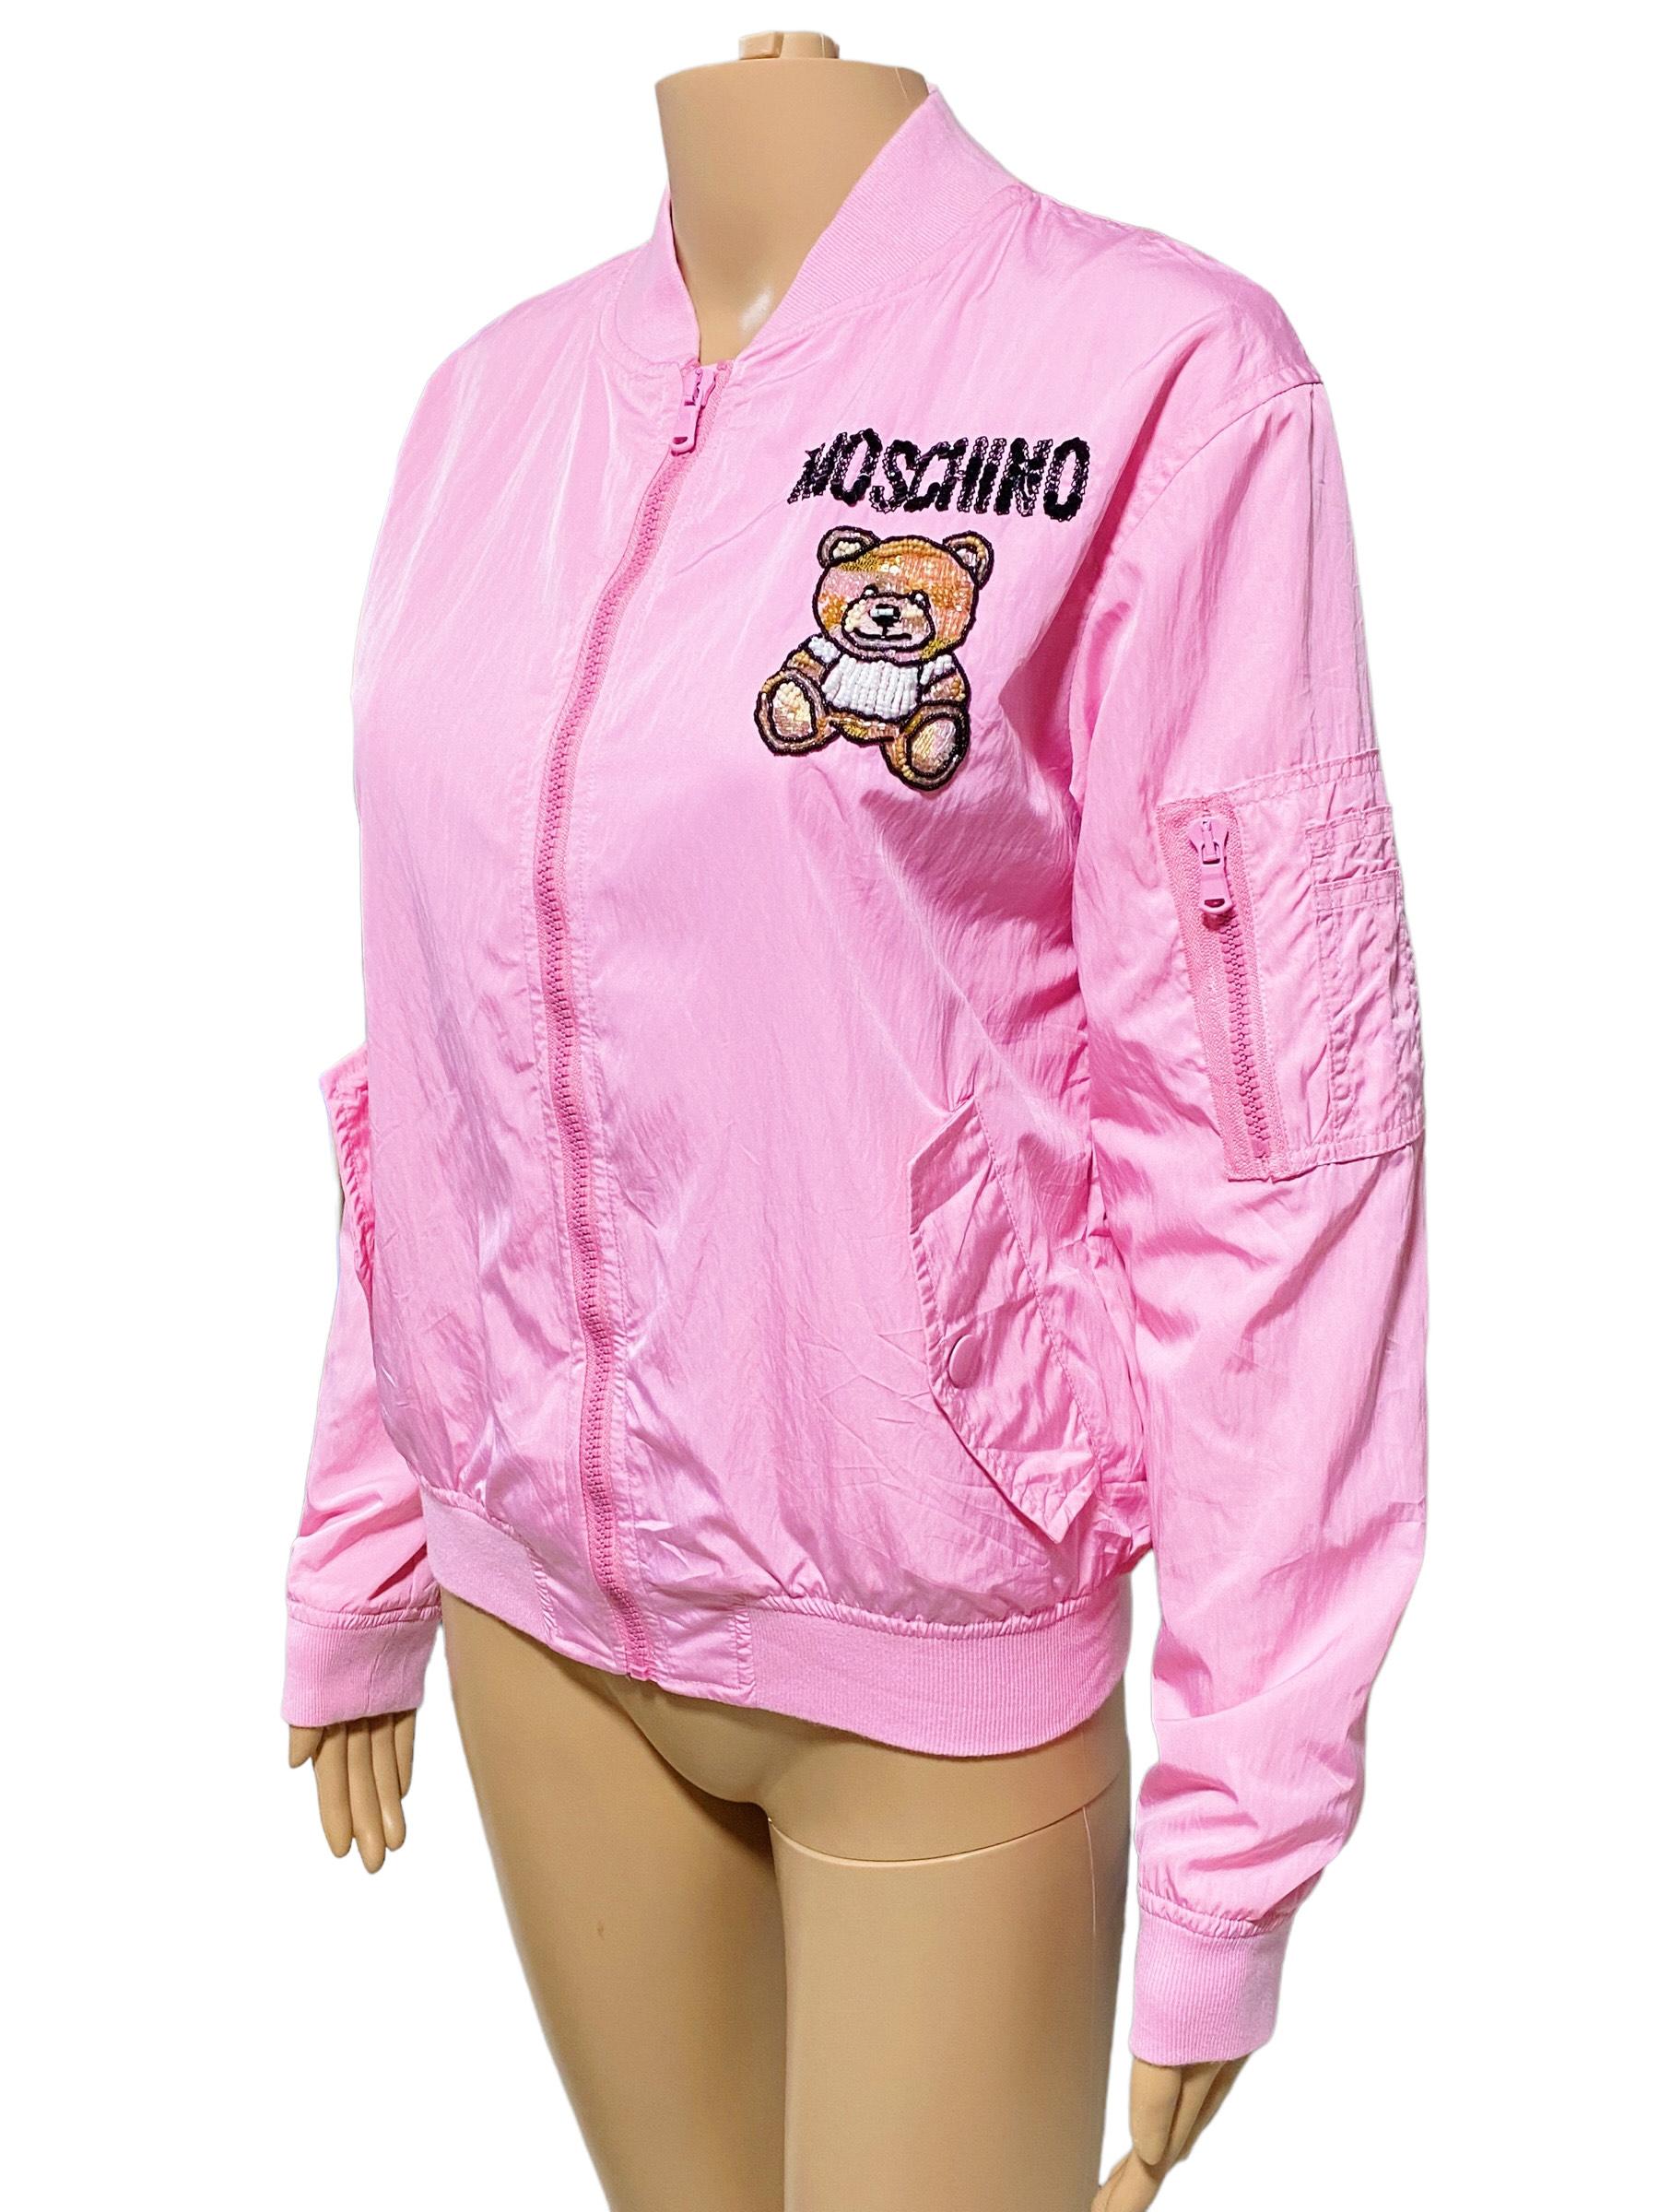 First debuted in 1988 by founder Franco Moschino, the iconic teddy bear is used season after season.
This limited edition sequin teddy bomber jacket from Moschino will give your look the playful touch.
Featuring sequin embroidery, side zipped